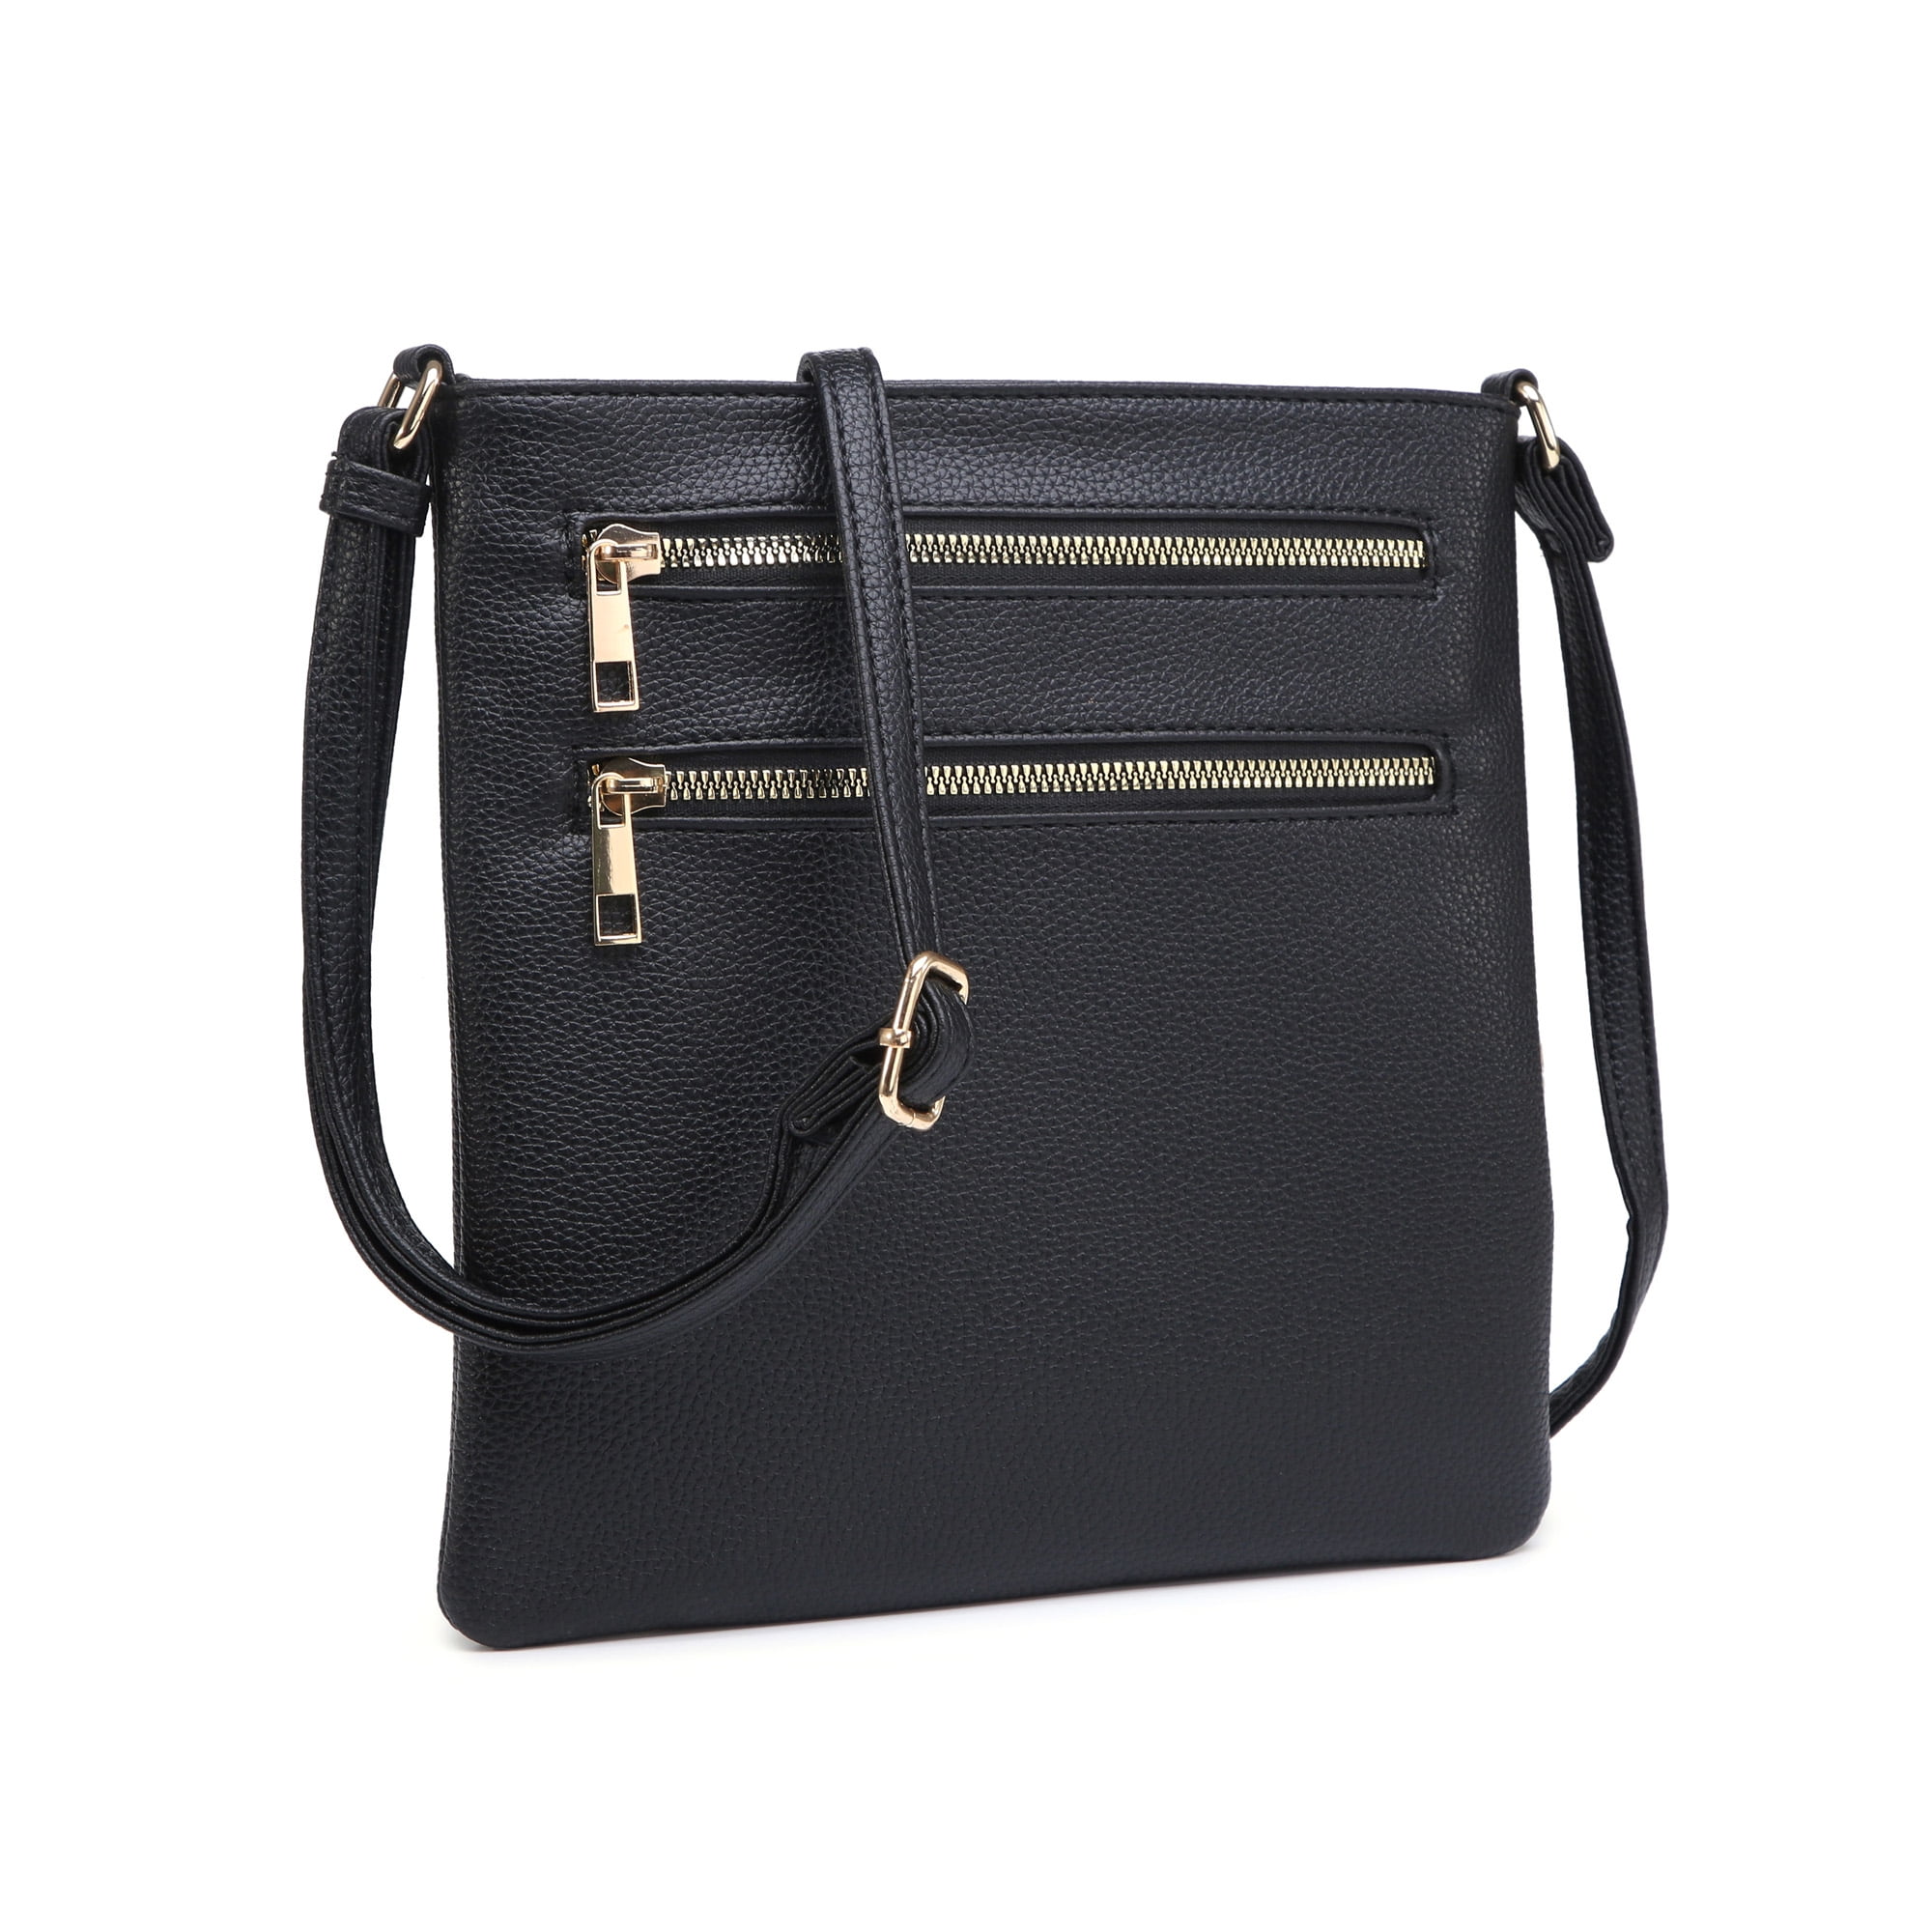 ZMQN's Vintage PU Leather Crossbody & Shoulder Bags for Women